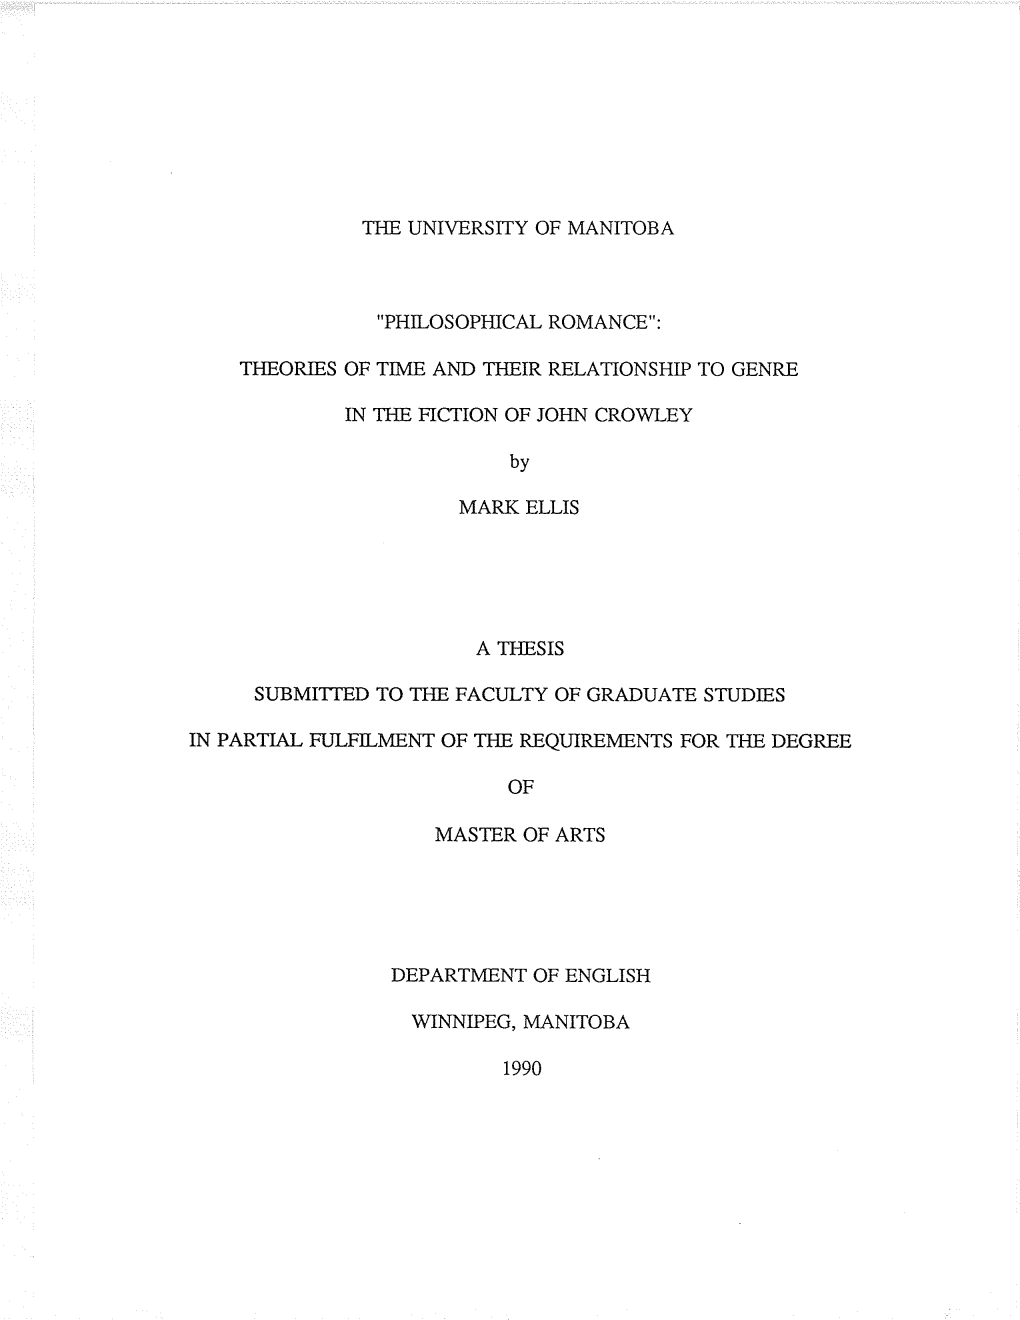 The University of Manitoba Ti{Eories of Time